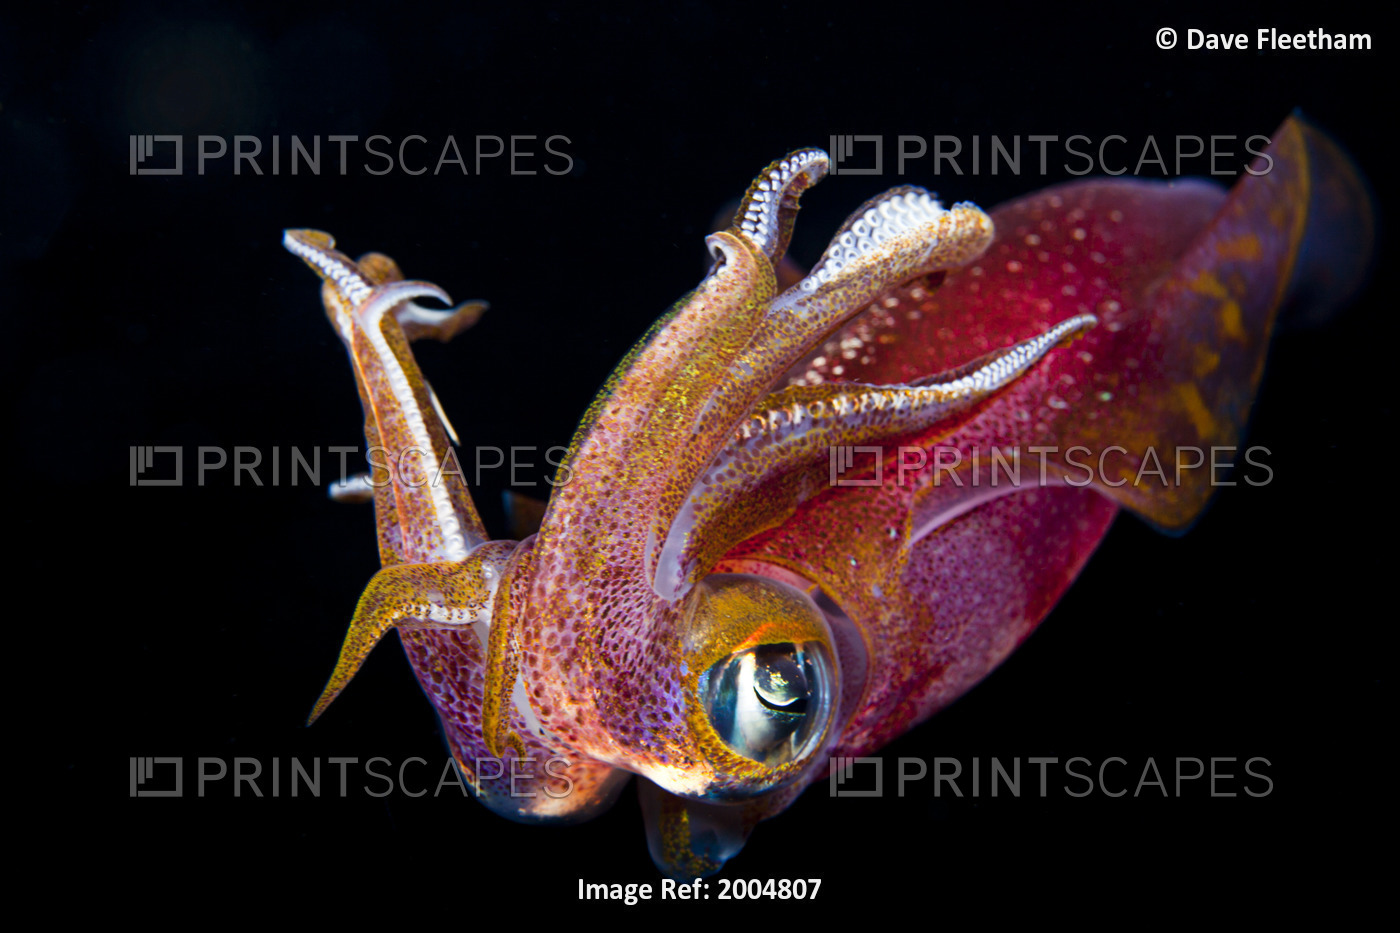 Hawaii. Maui, Kapalua, Close Up Of A Male Oval Squid During A Night Dive.